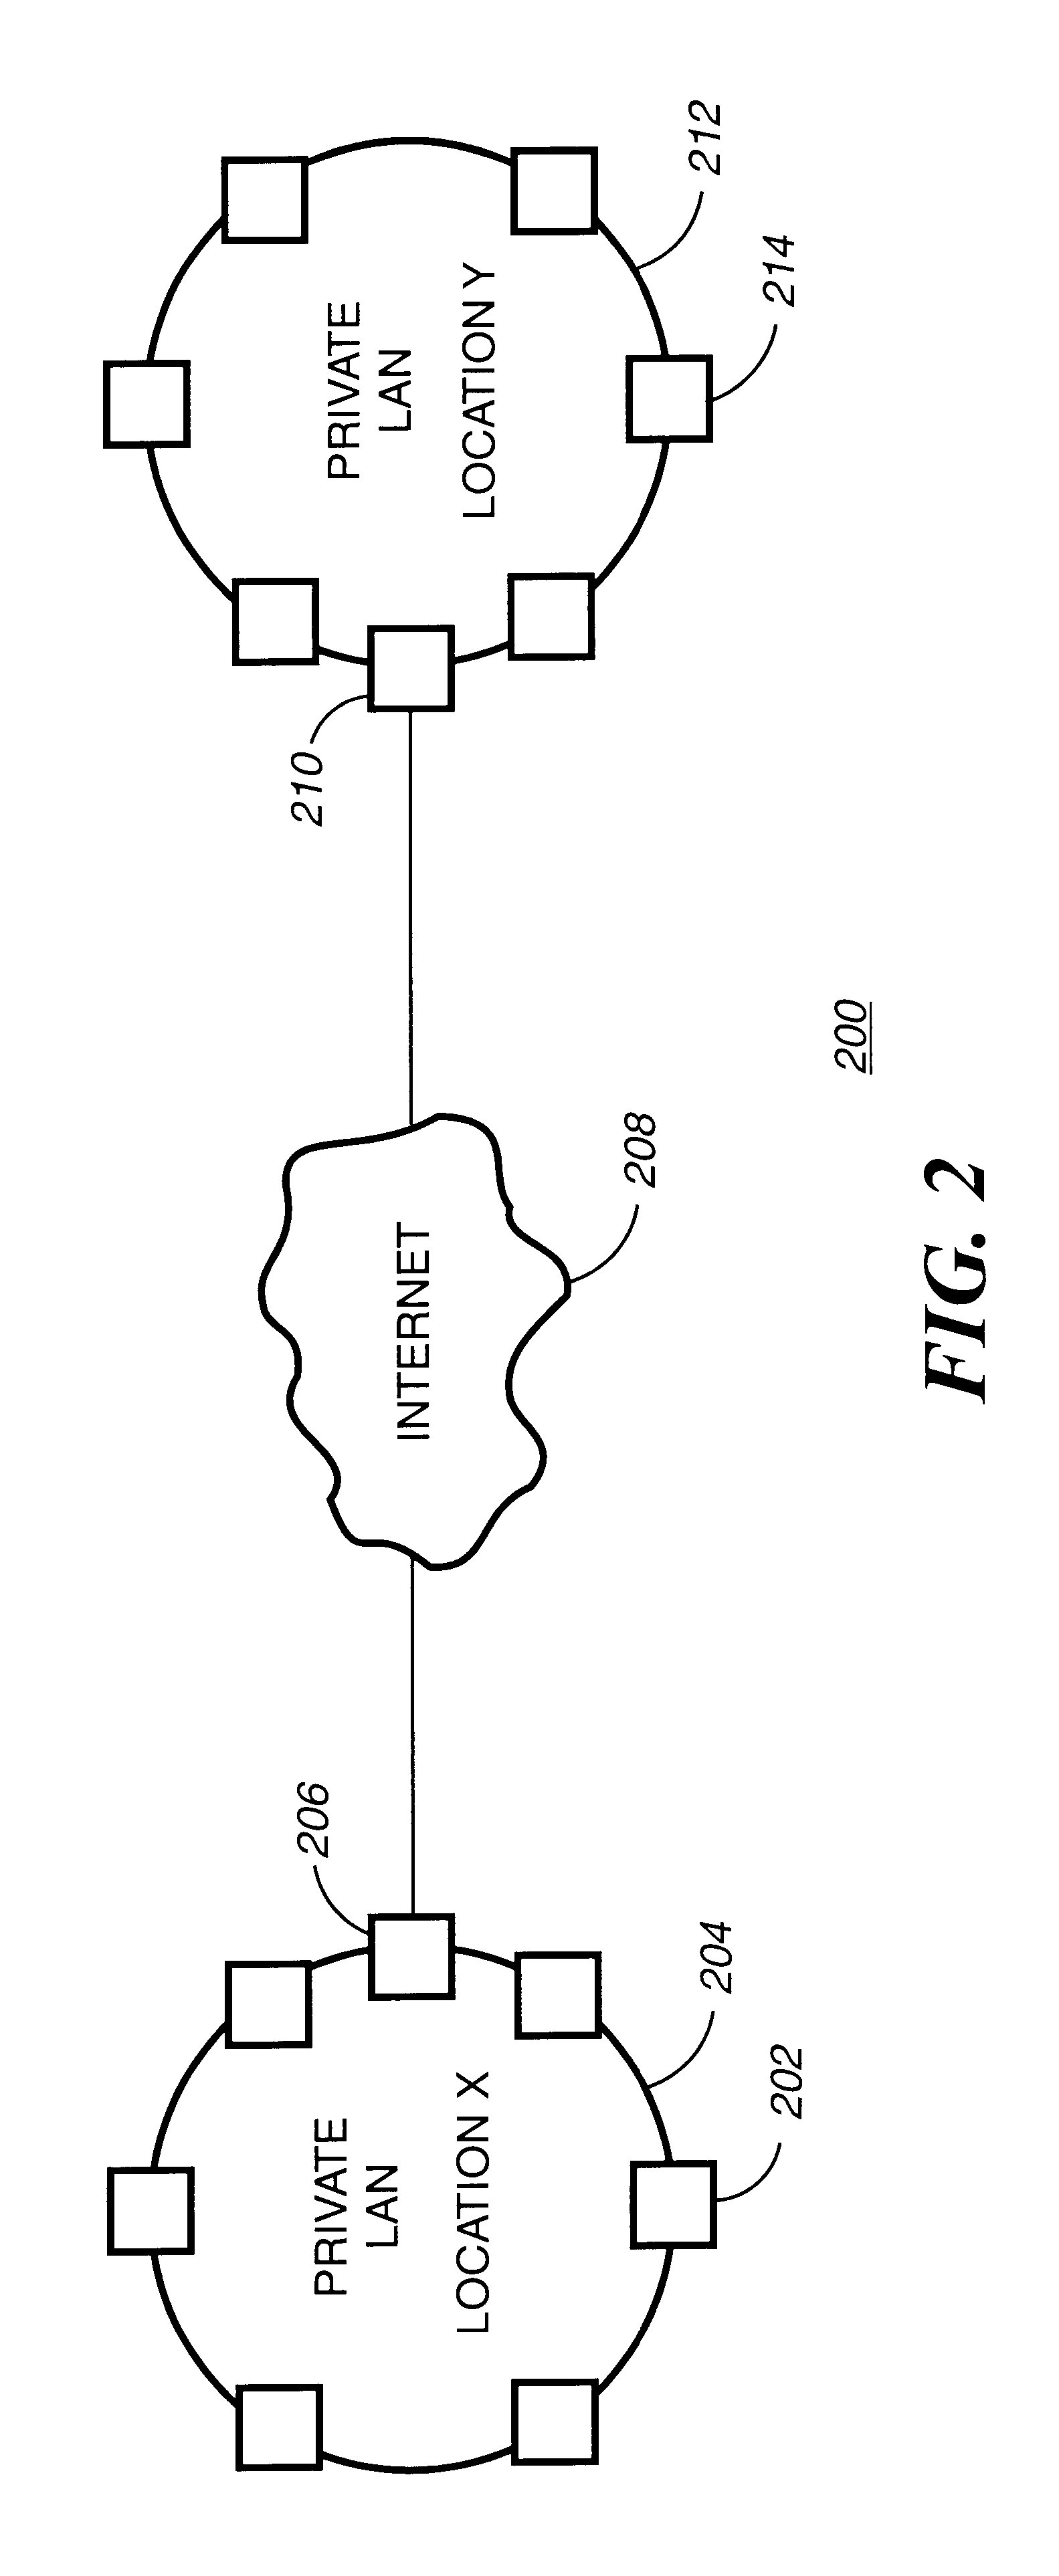 Method and apparatus for monitoring the availability of nodes in a communications network